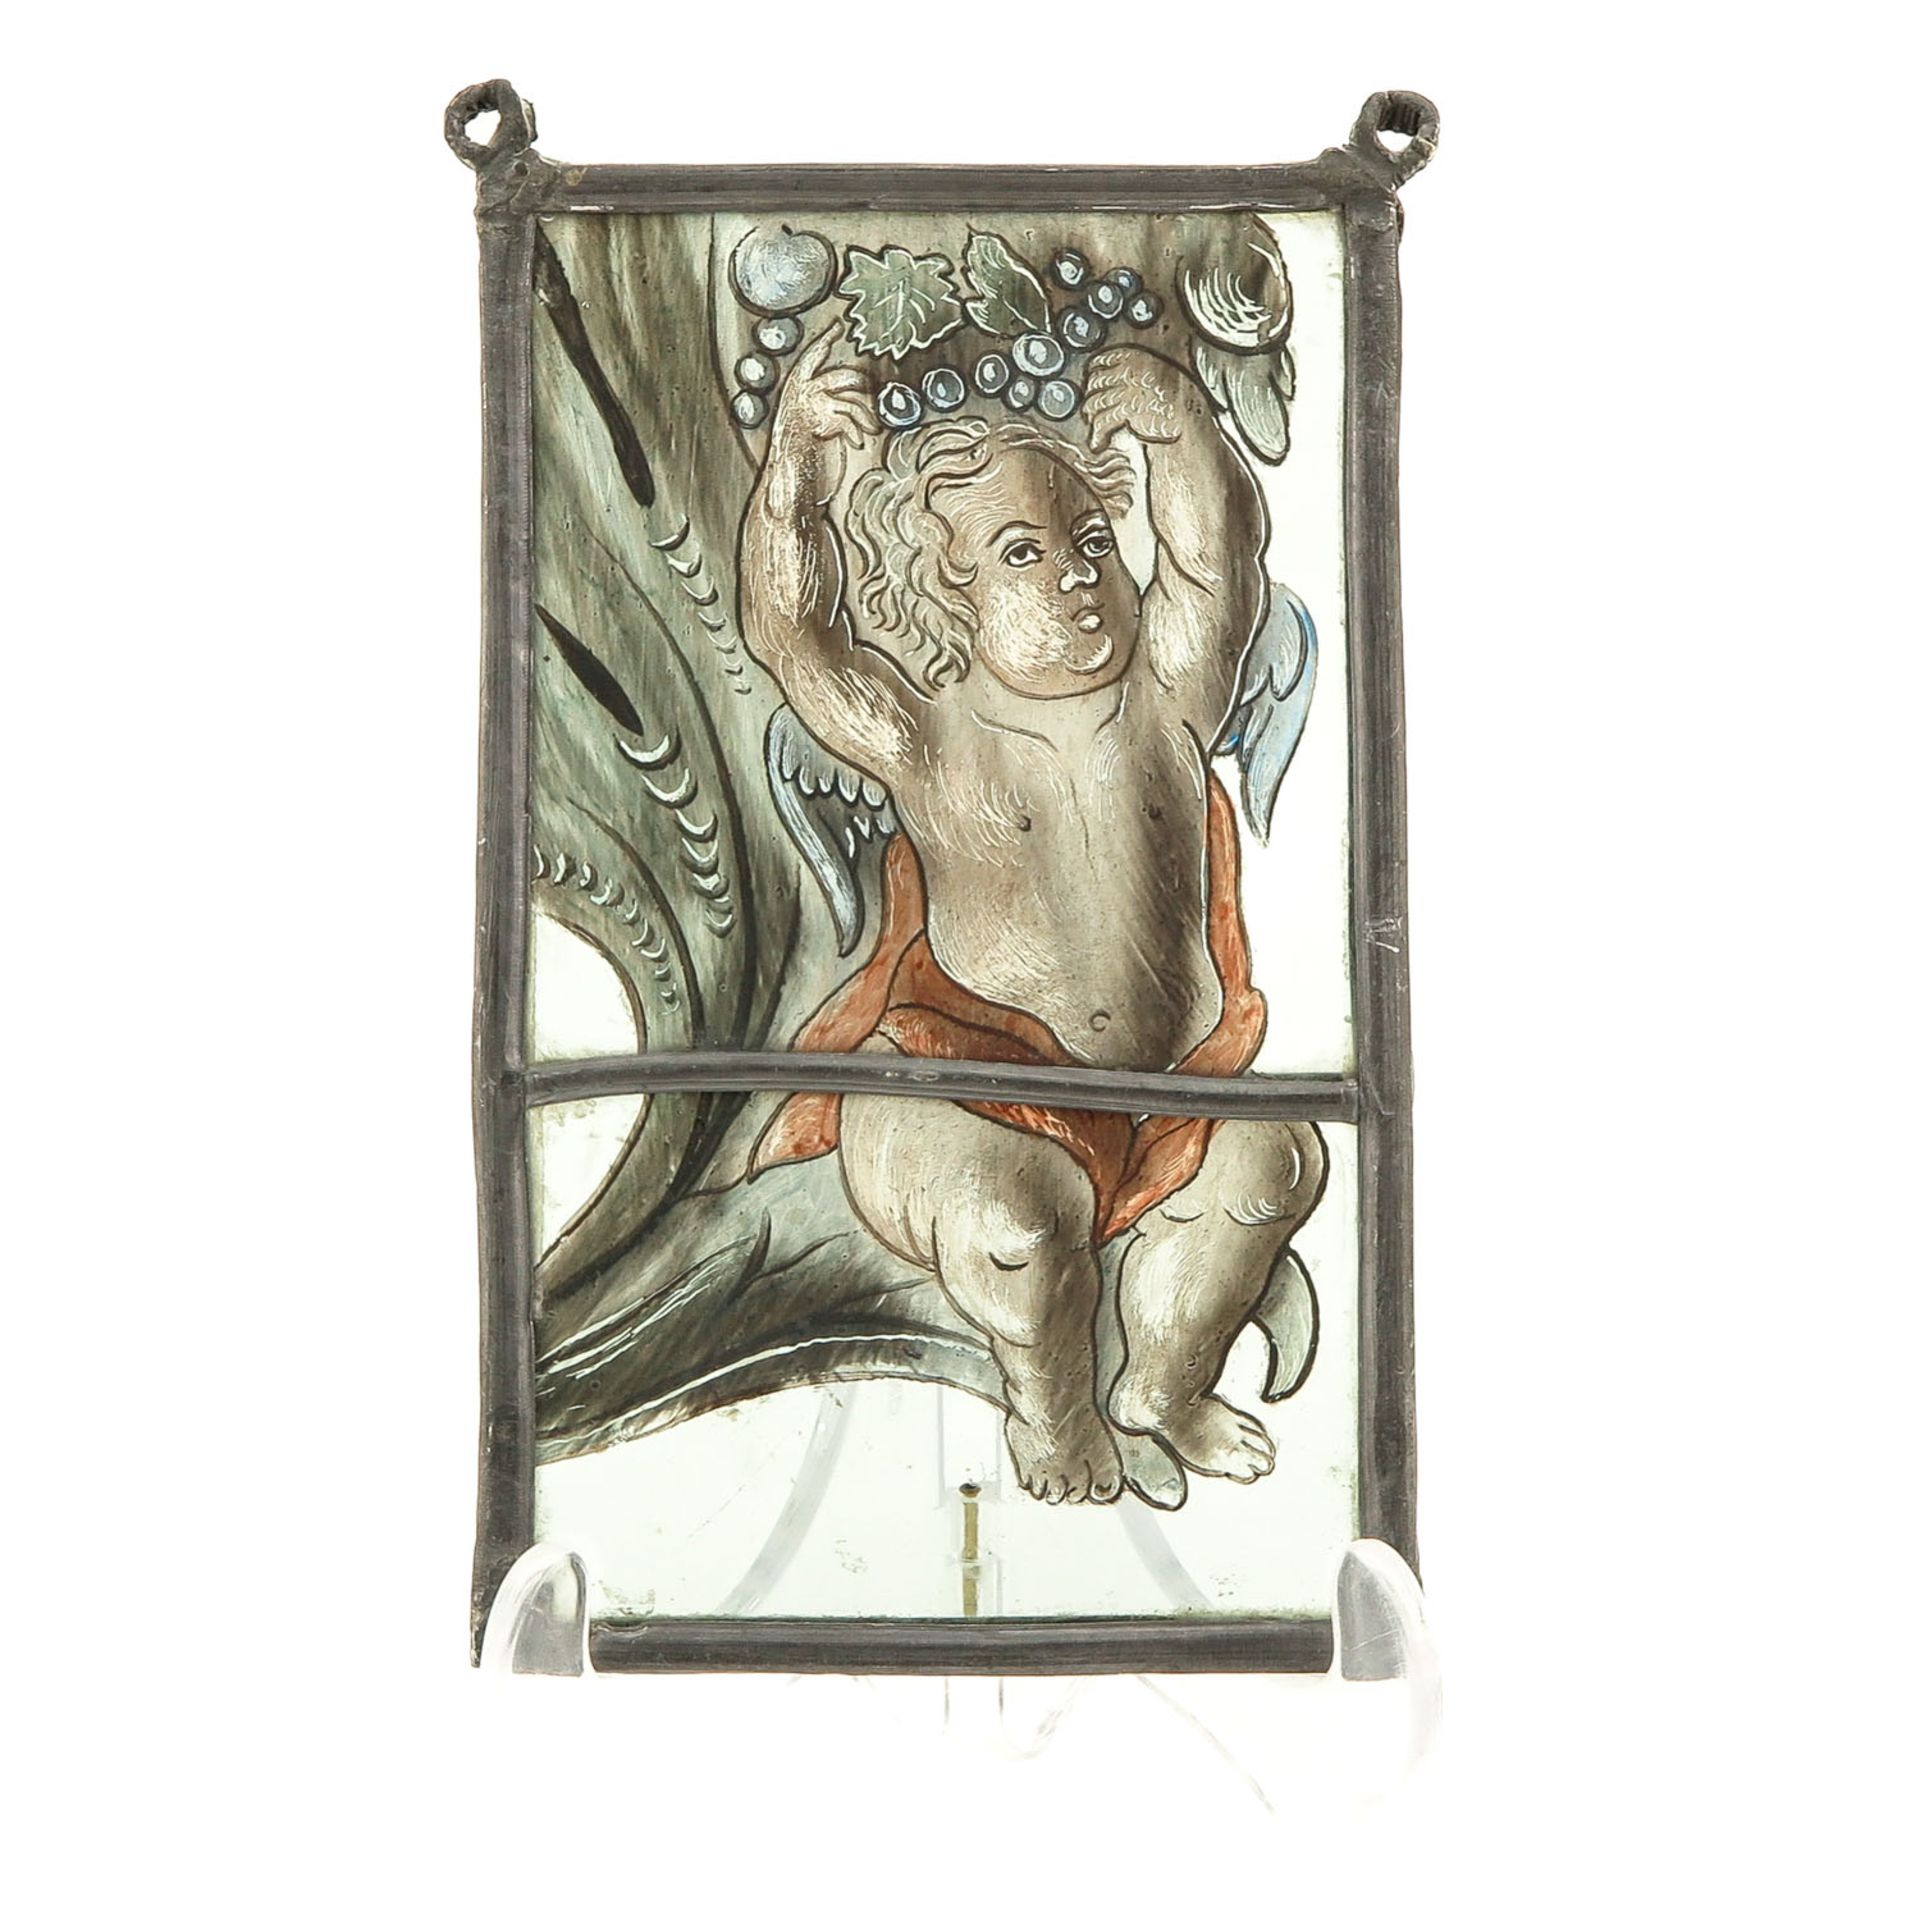 2 Pieces of Stained Glass - Image 6 of 10